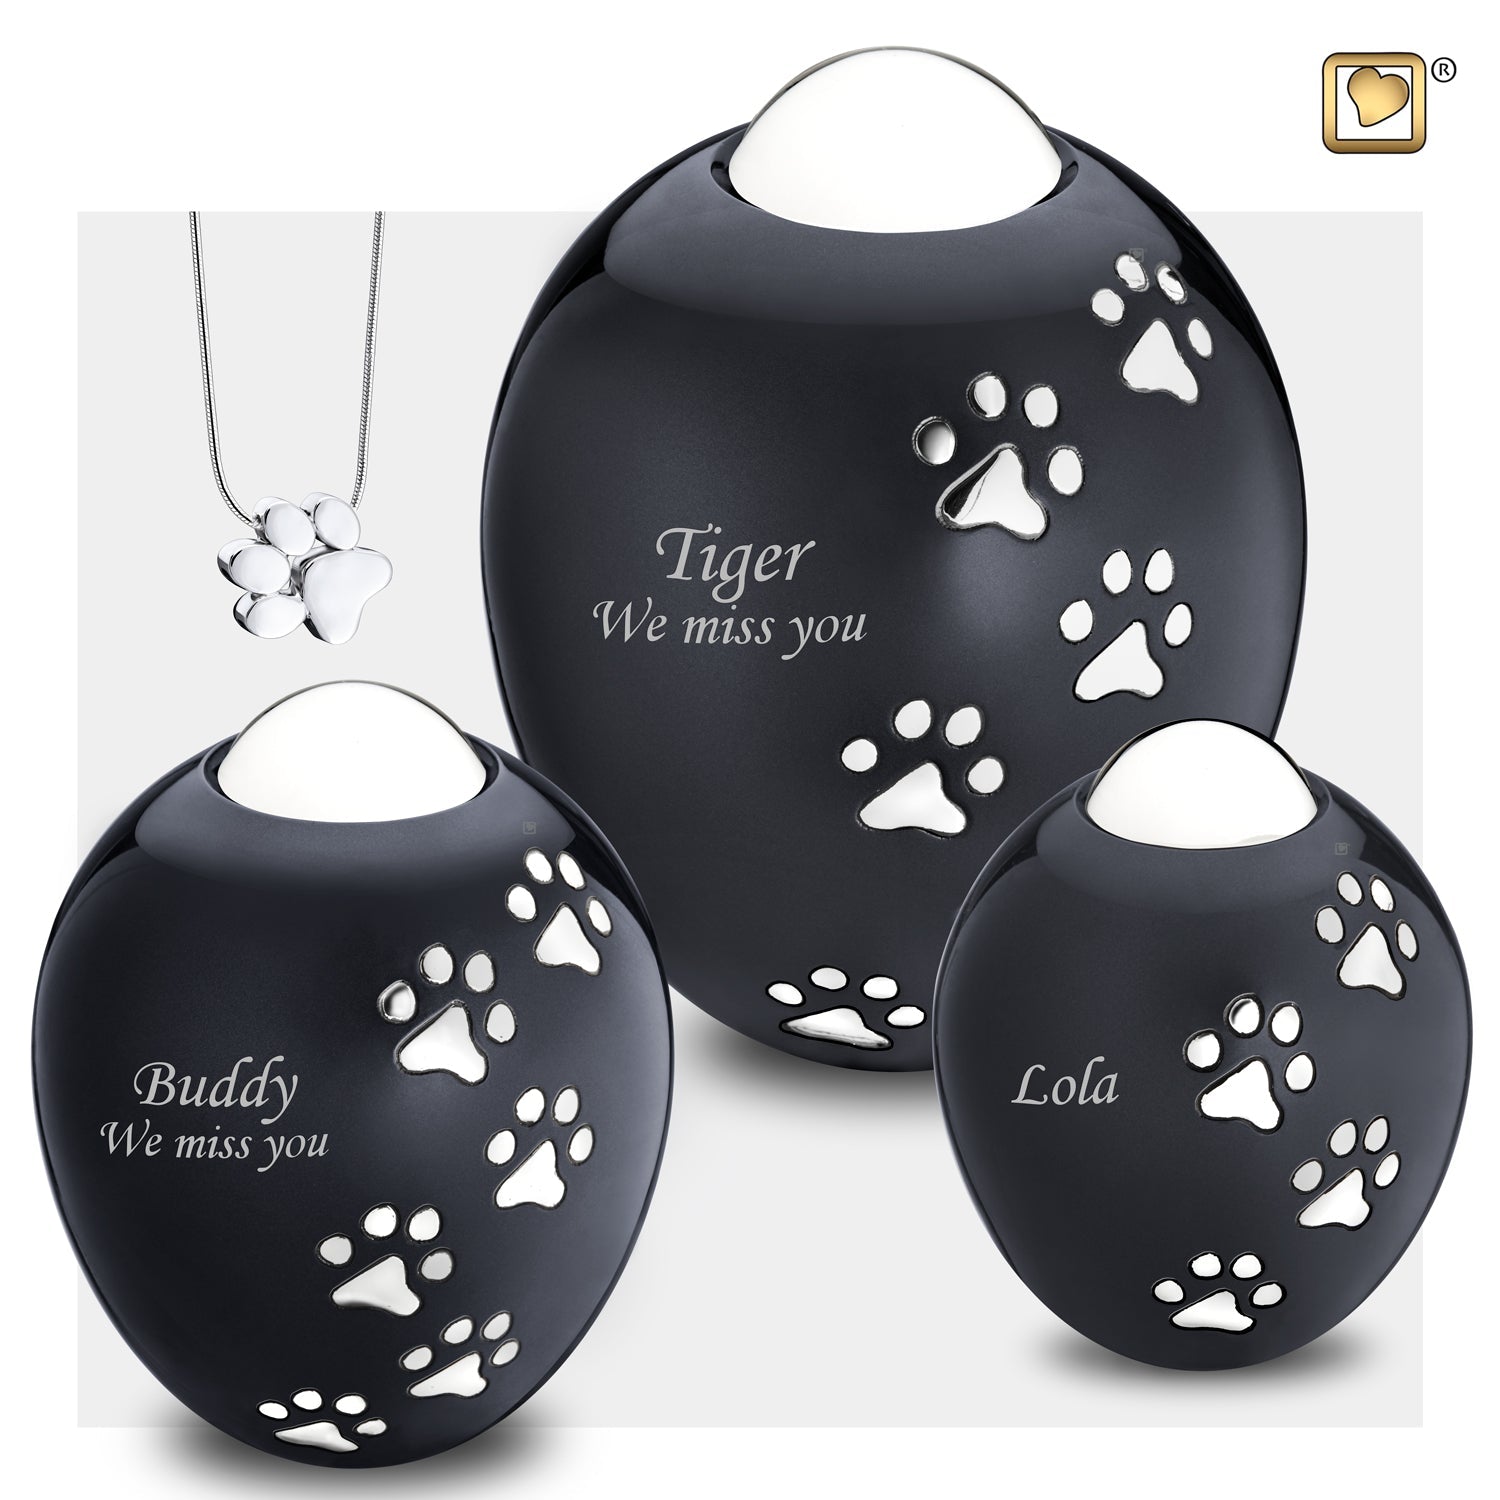 3 different sizes of Pet cremation urns with paw prints and a paw shaped pendant necklace cremation jewelry